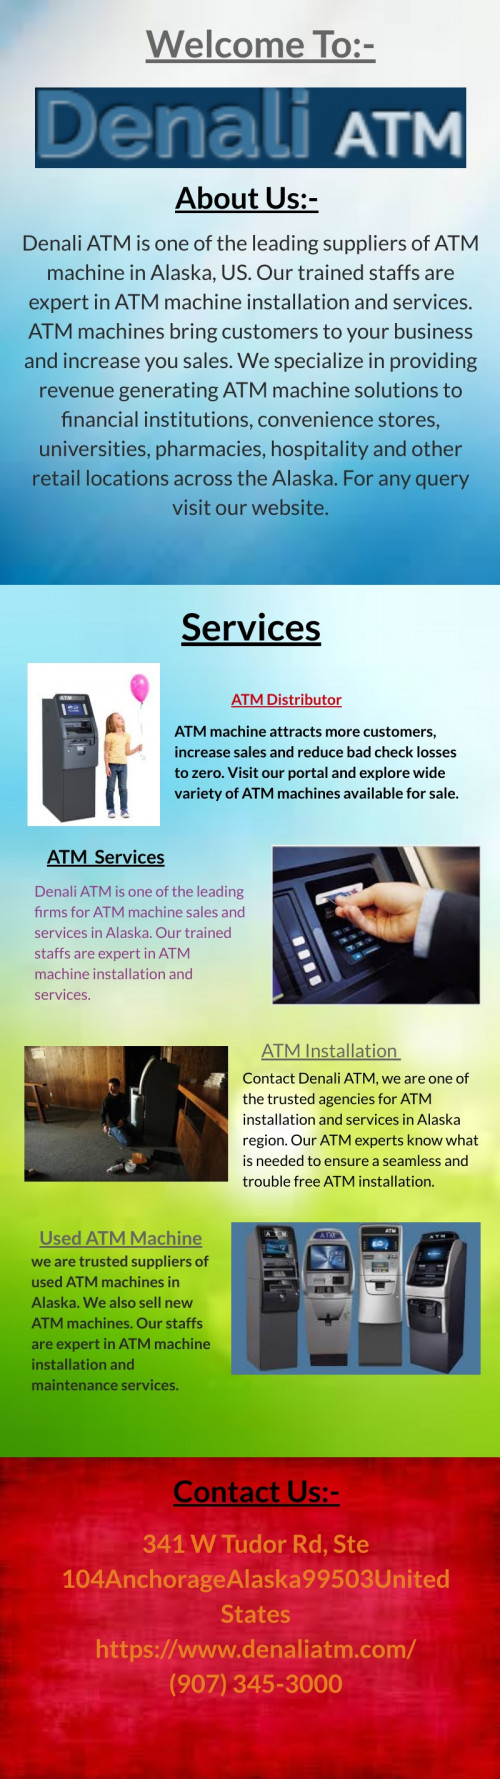 Denali ATM is one of the leading suppliers of ATM machine in Alaska, US. Our trained staffs are expert in ATM machine installation and services. ATM machines bring customers to your business and increase you sales. We specialize in providing revenue generating ATM machine solutions to financial institutions, convenience stores, universities, pharmacies, hospitality and other retail locations across the Alaska. For any query visit our website @ https://www.denaliatm.com/